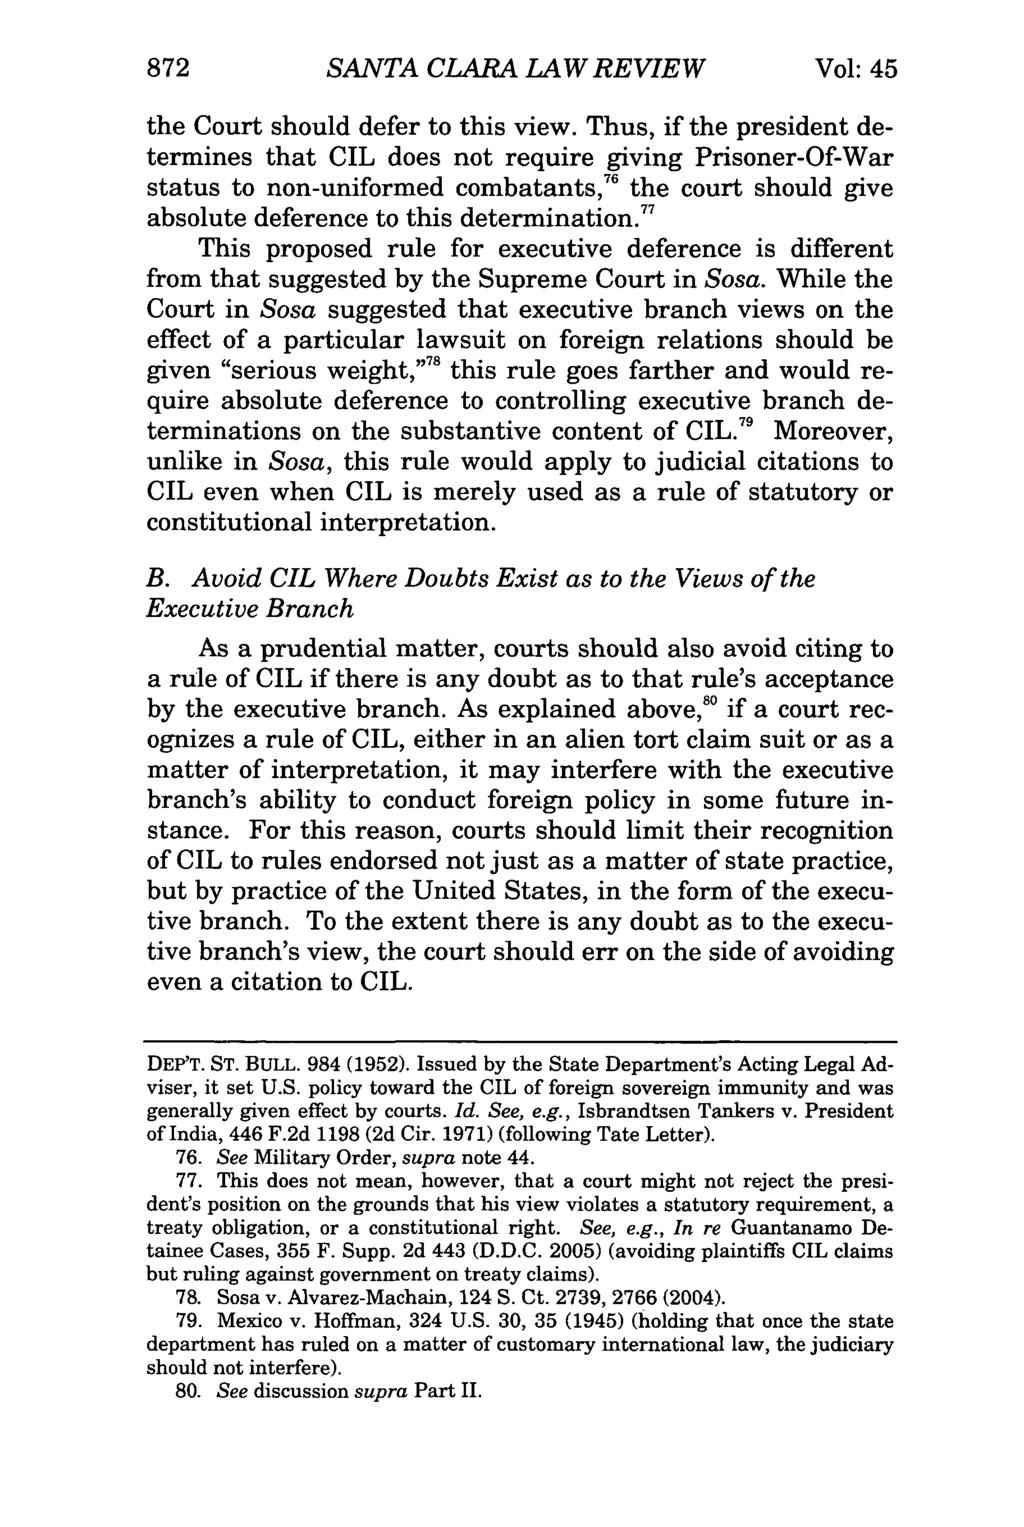 872 SANTA CLARA LAW REVIEW Vol: 45 the Court should defer to this view.